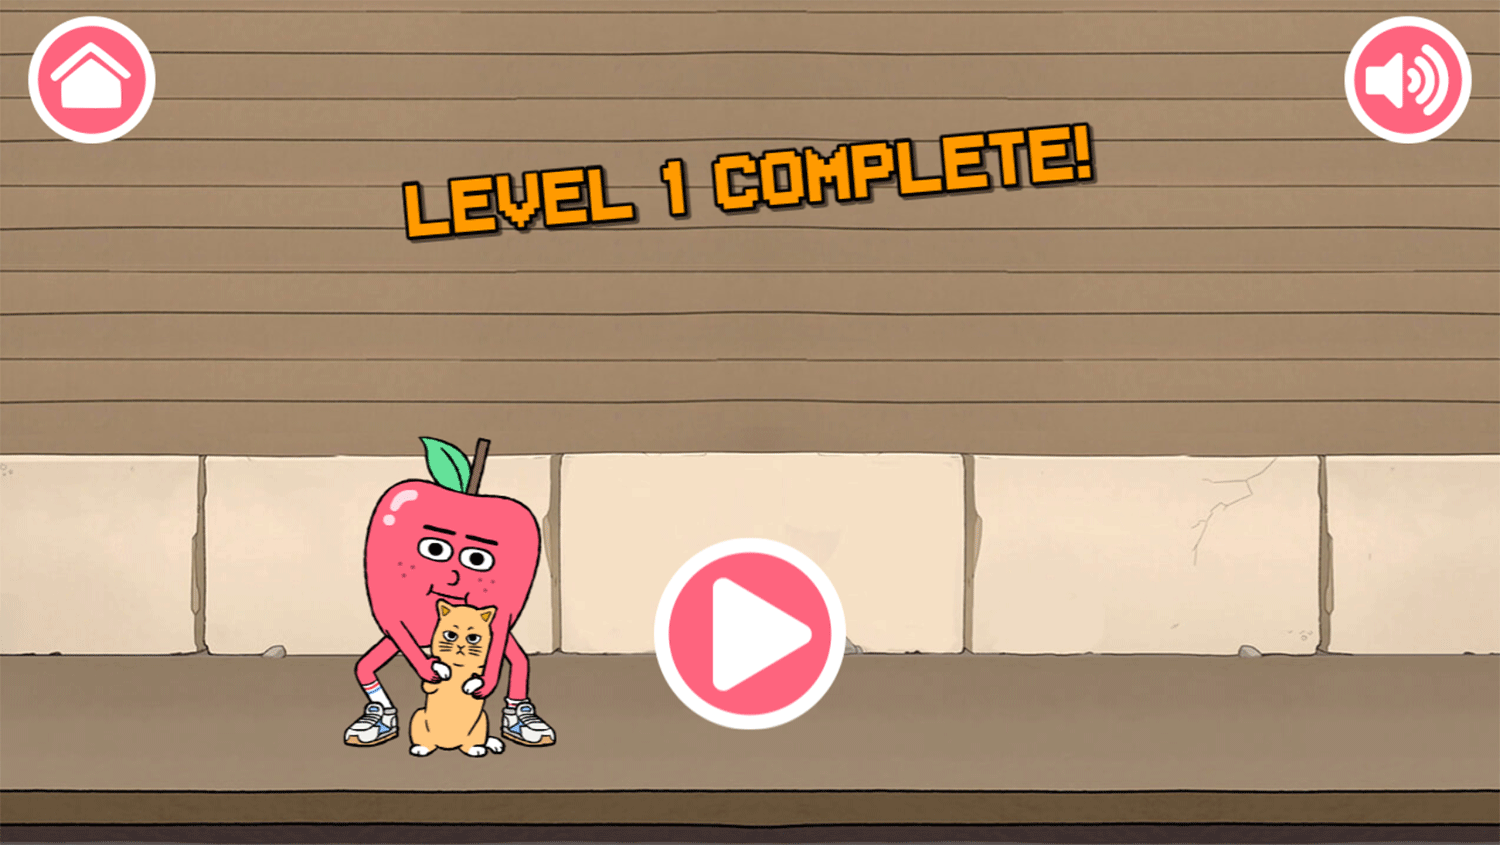 Apple & Onion Cat Rescue Game Level Complete Screenshot.